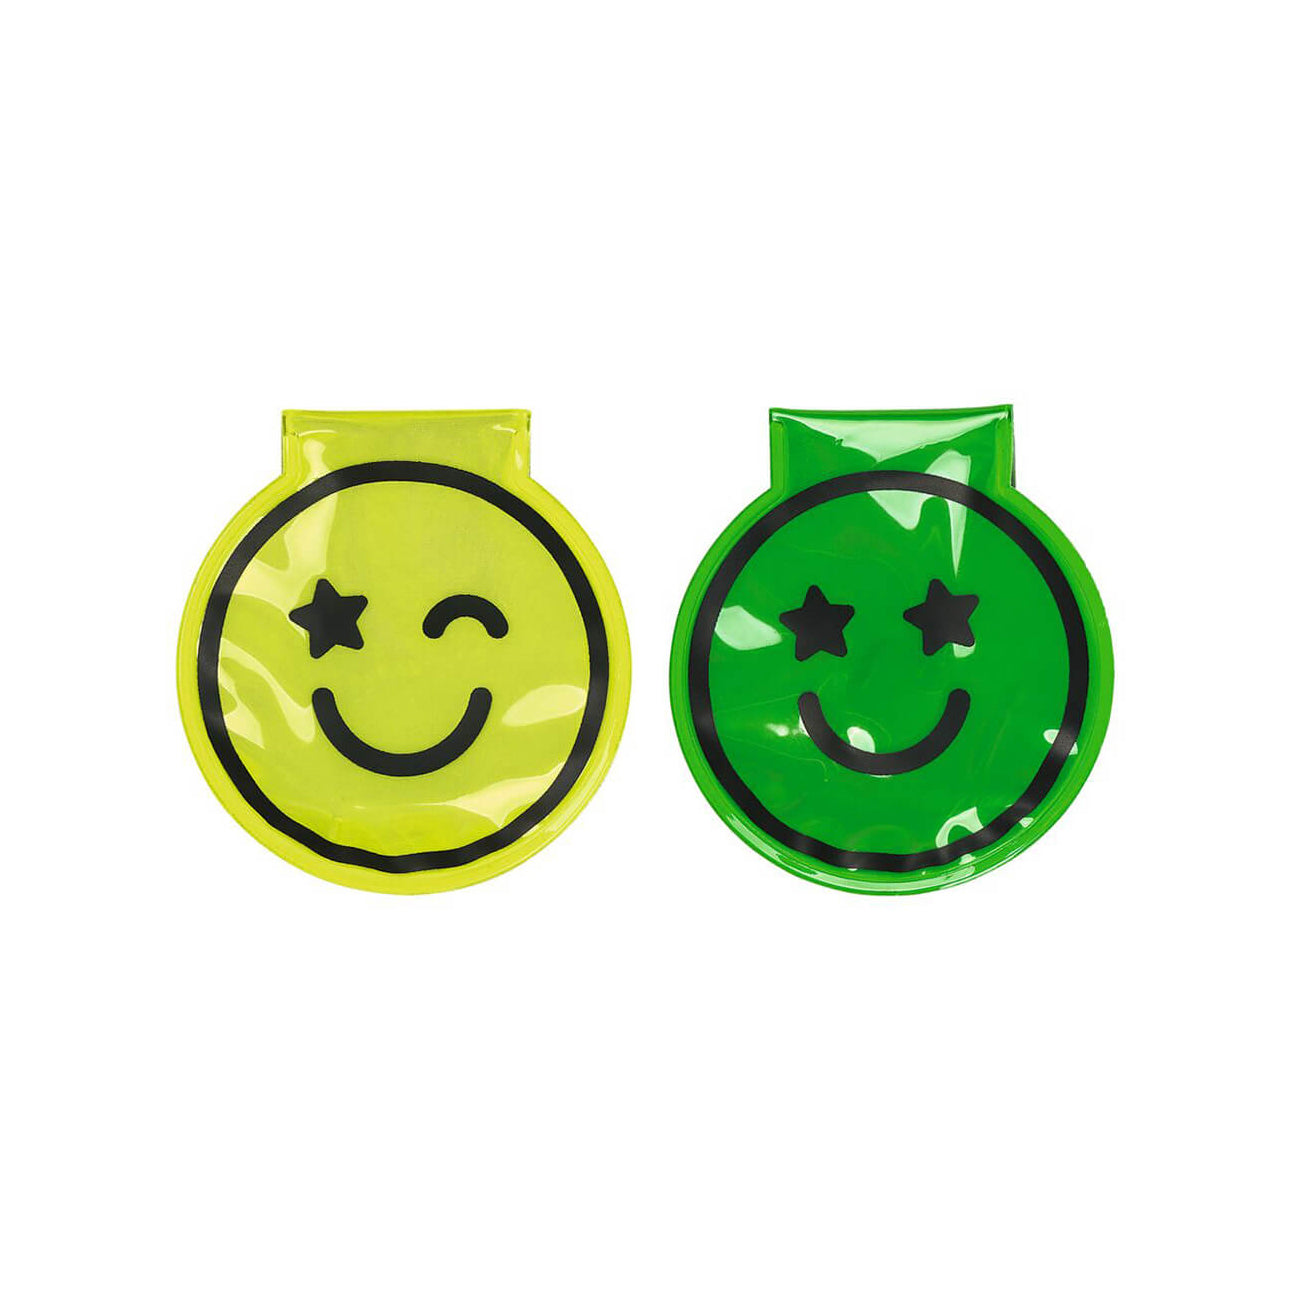 Smile Magnetic Clips with LED 